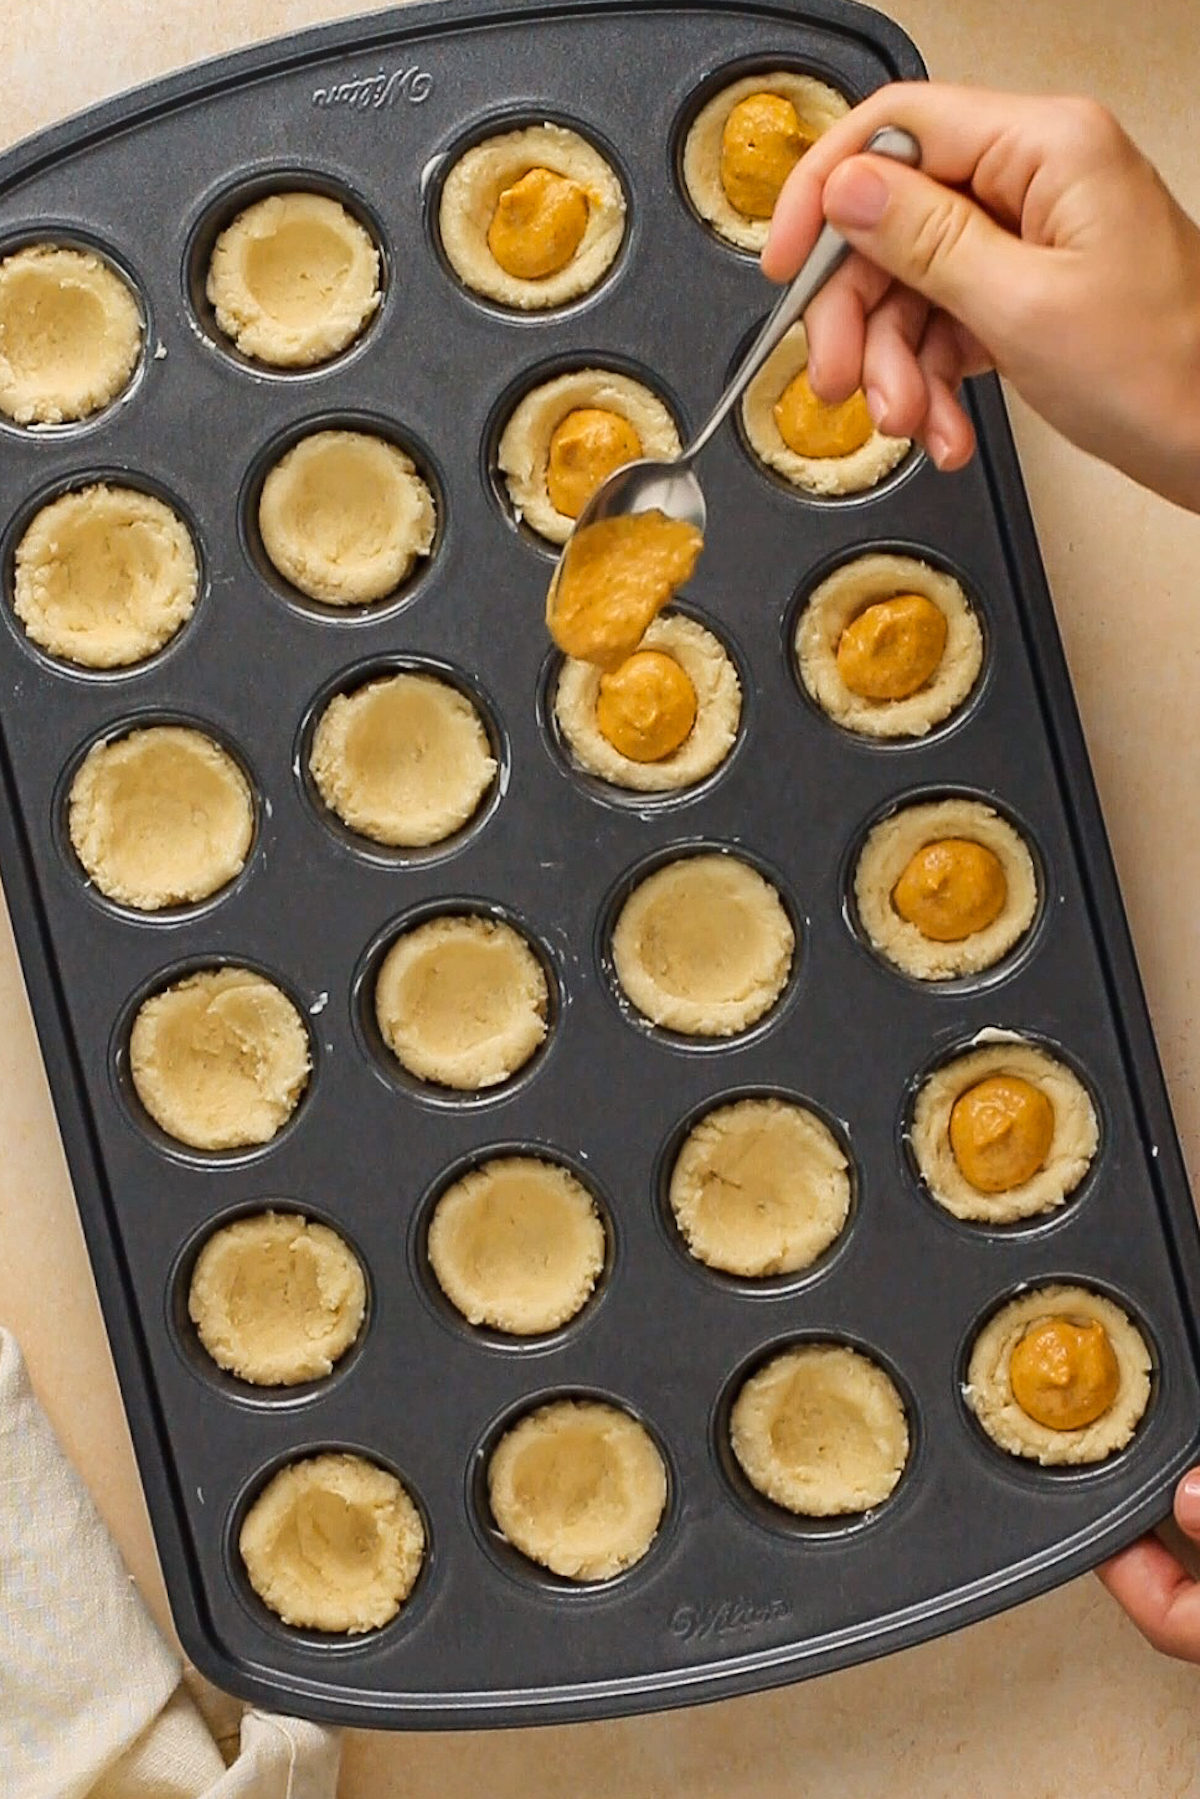 Pie filling being spooned into unbaked cookie cups.